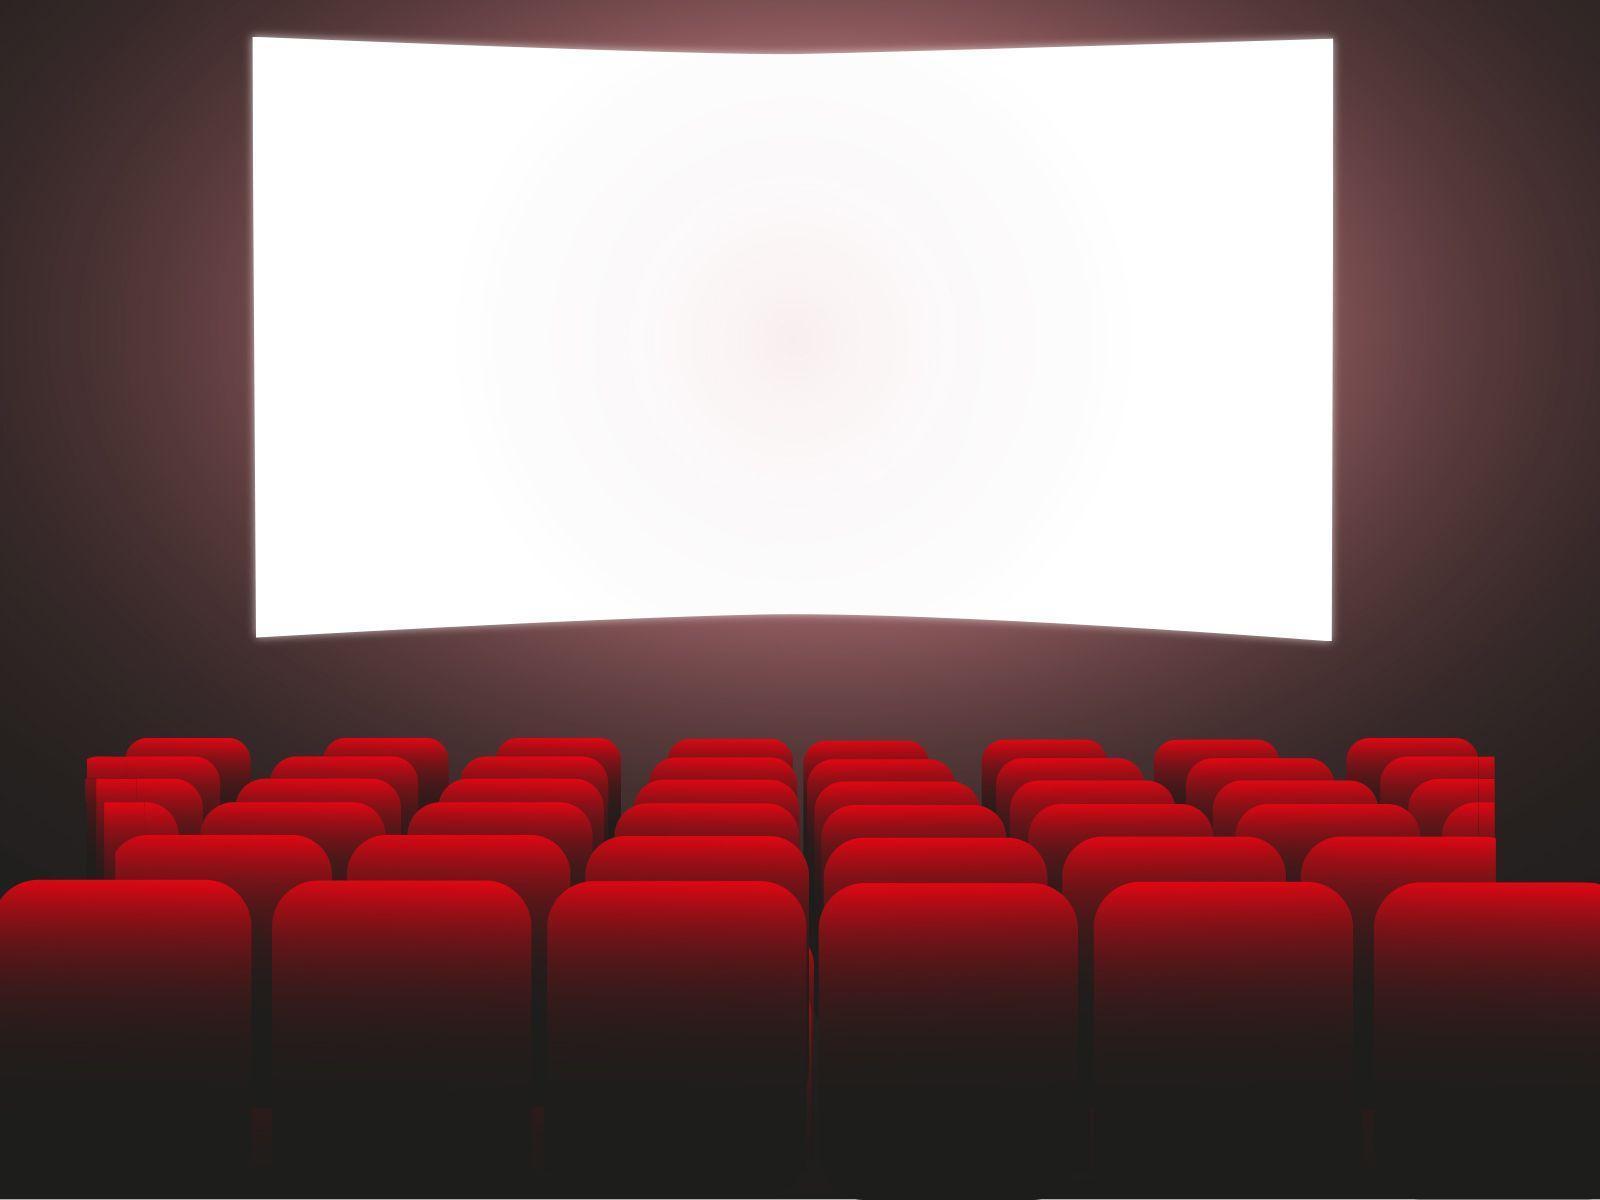 Theater Backgrounds Wallpaper Cave